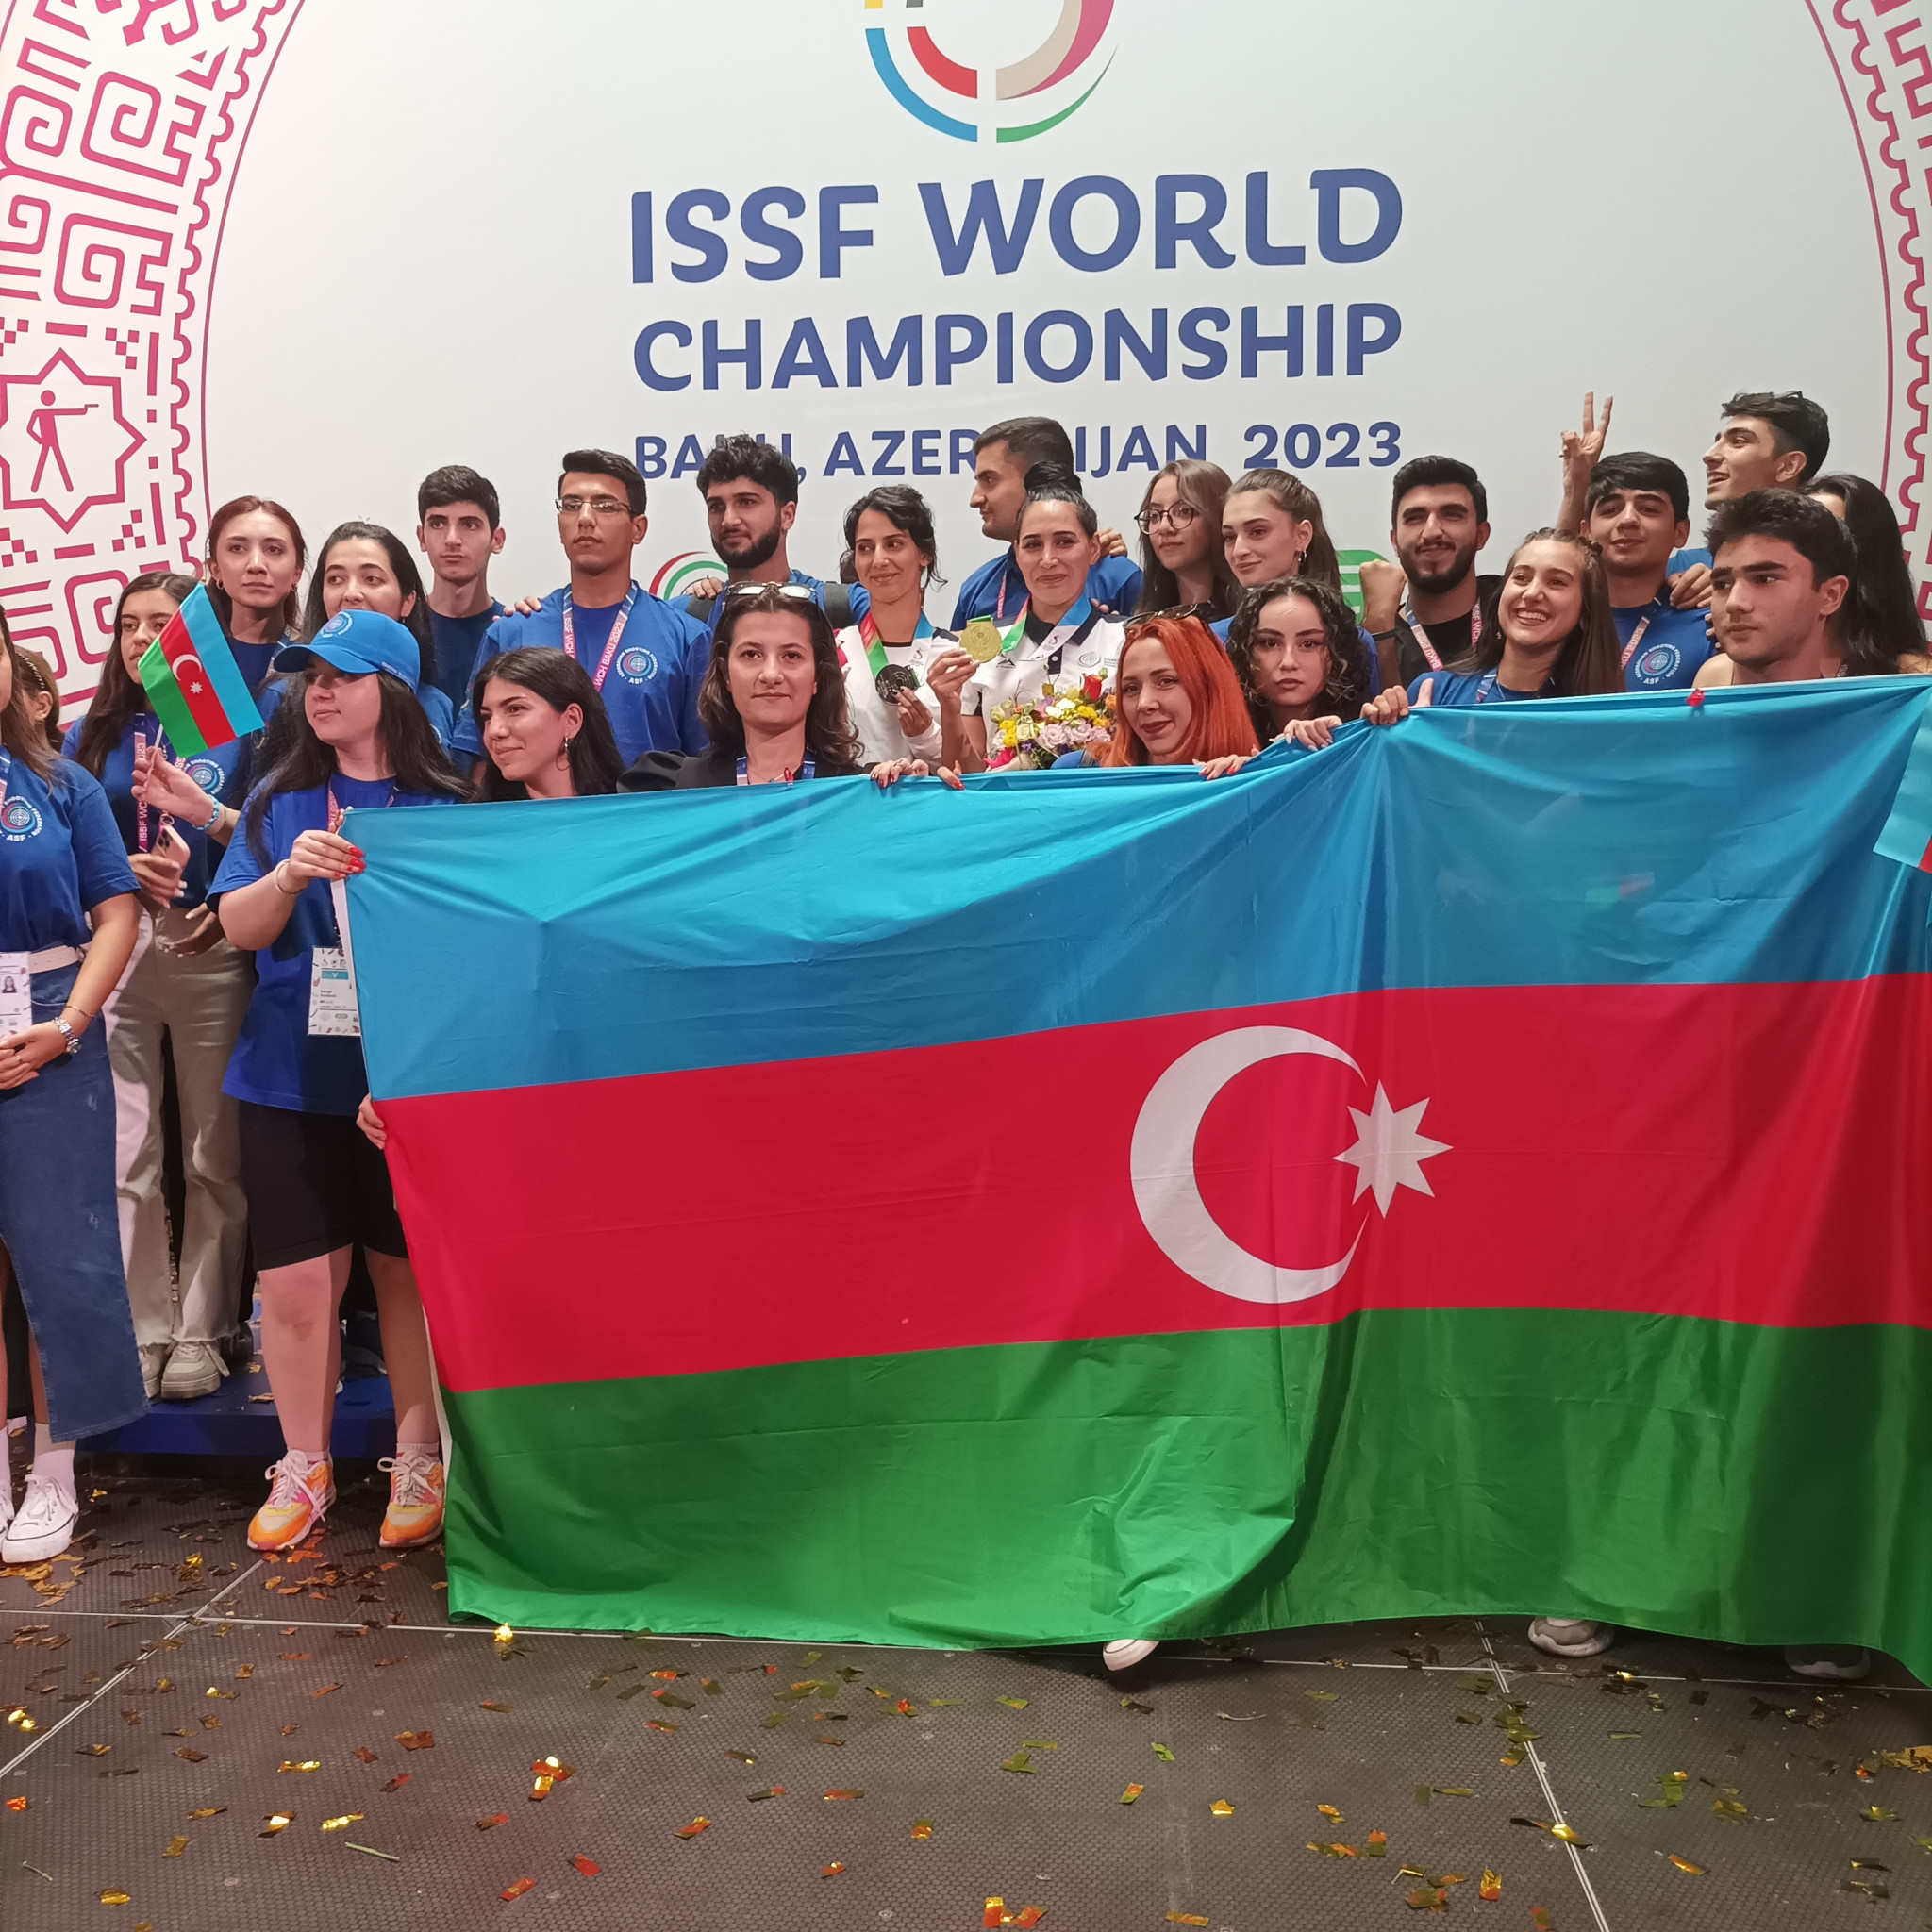 Celebrations for Azerbaijan's medallists at ISSF Shooting World Championships